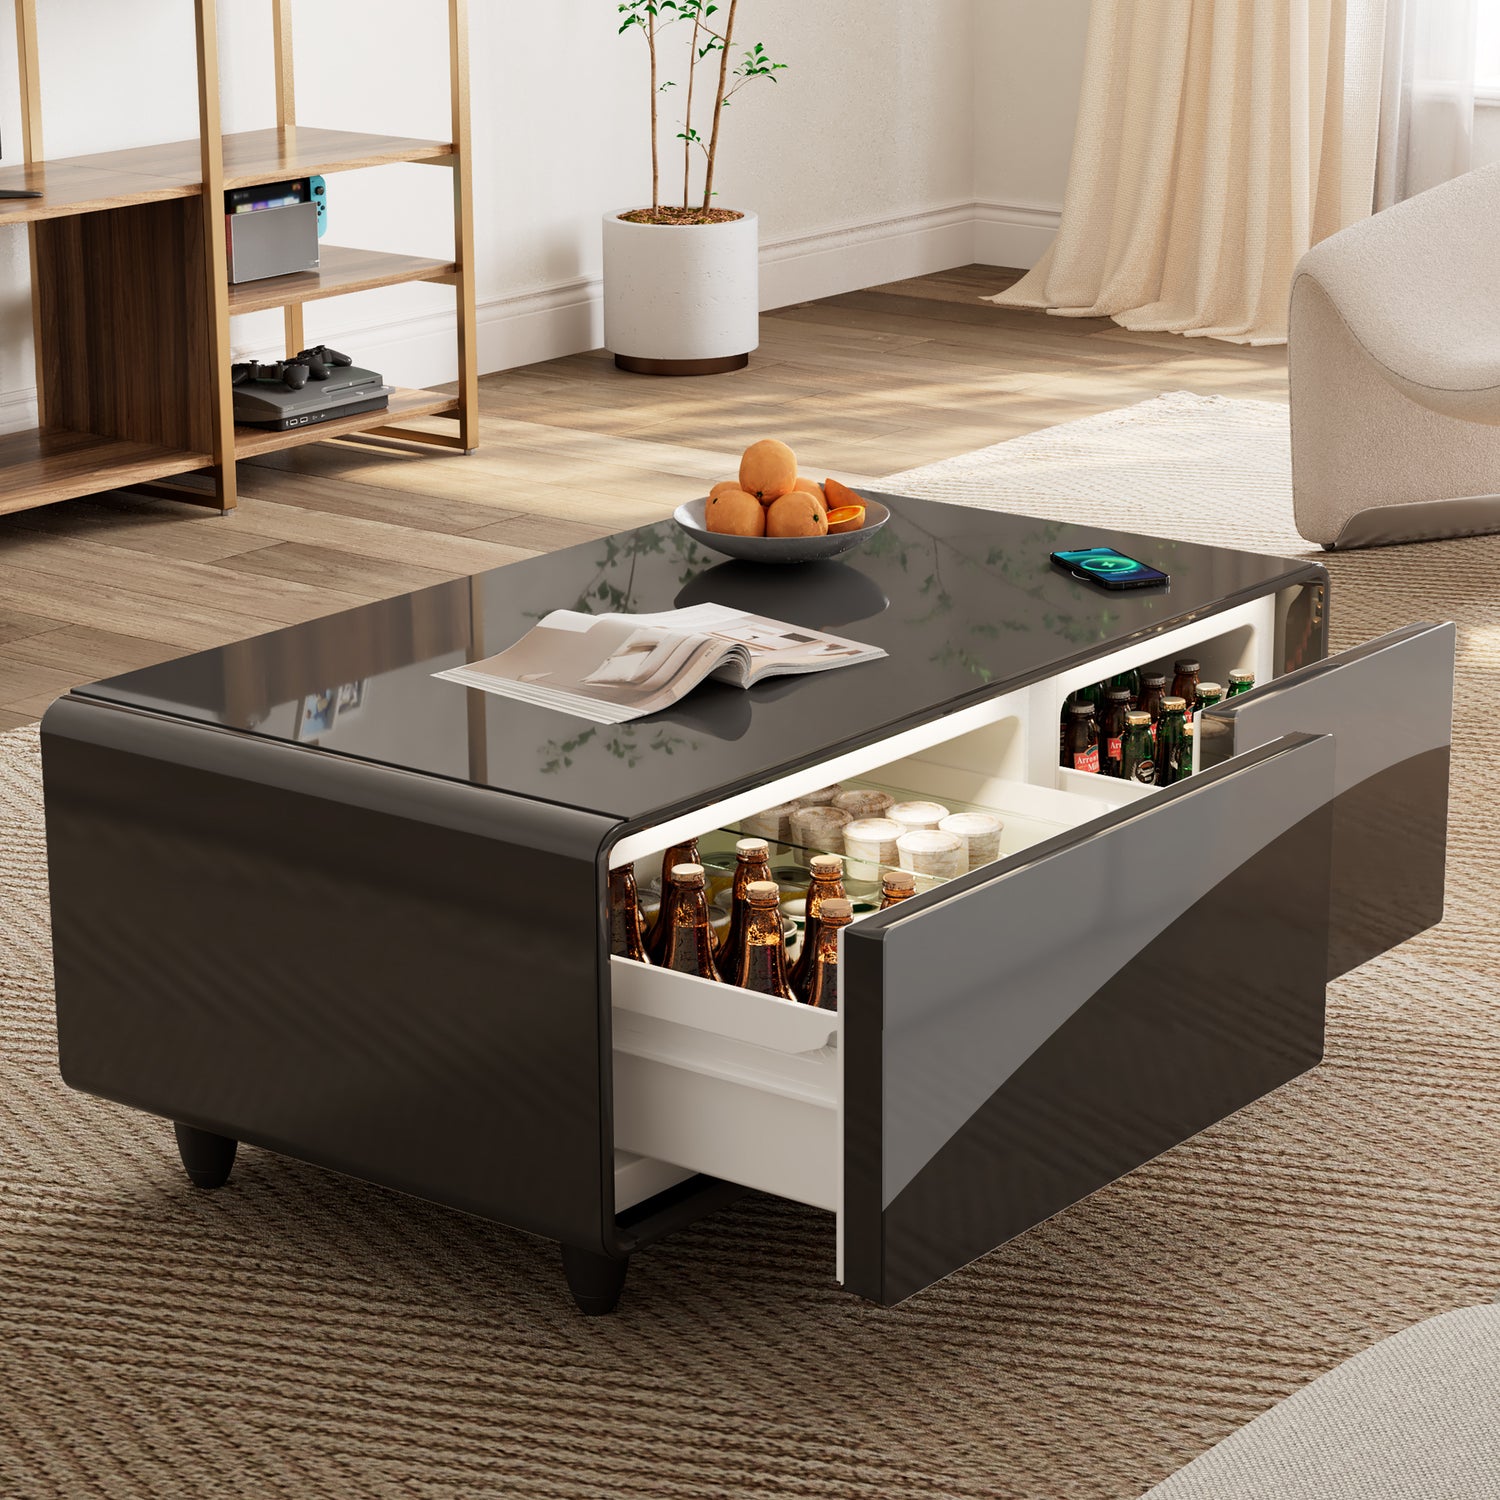 41 inch Black Smart Fridge Coffee Table with Bluetooth Speakers with Glass Top, Piano Black Sides, Lifestyle Fridge Drawer Open